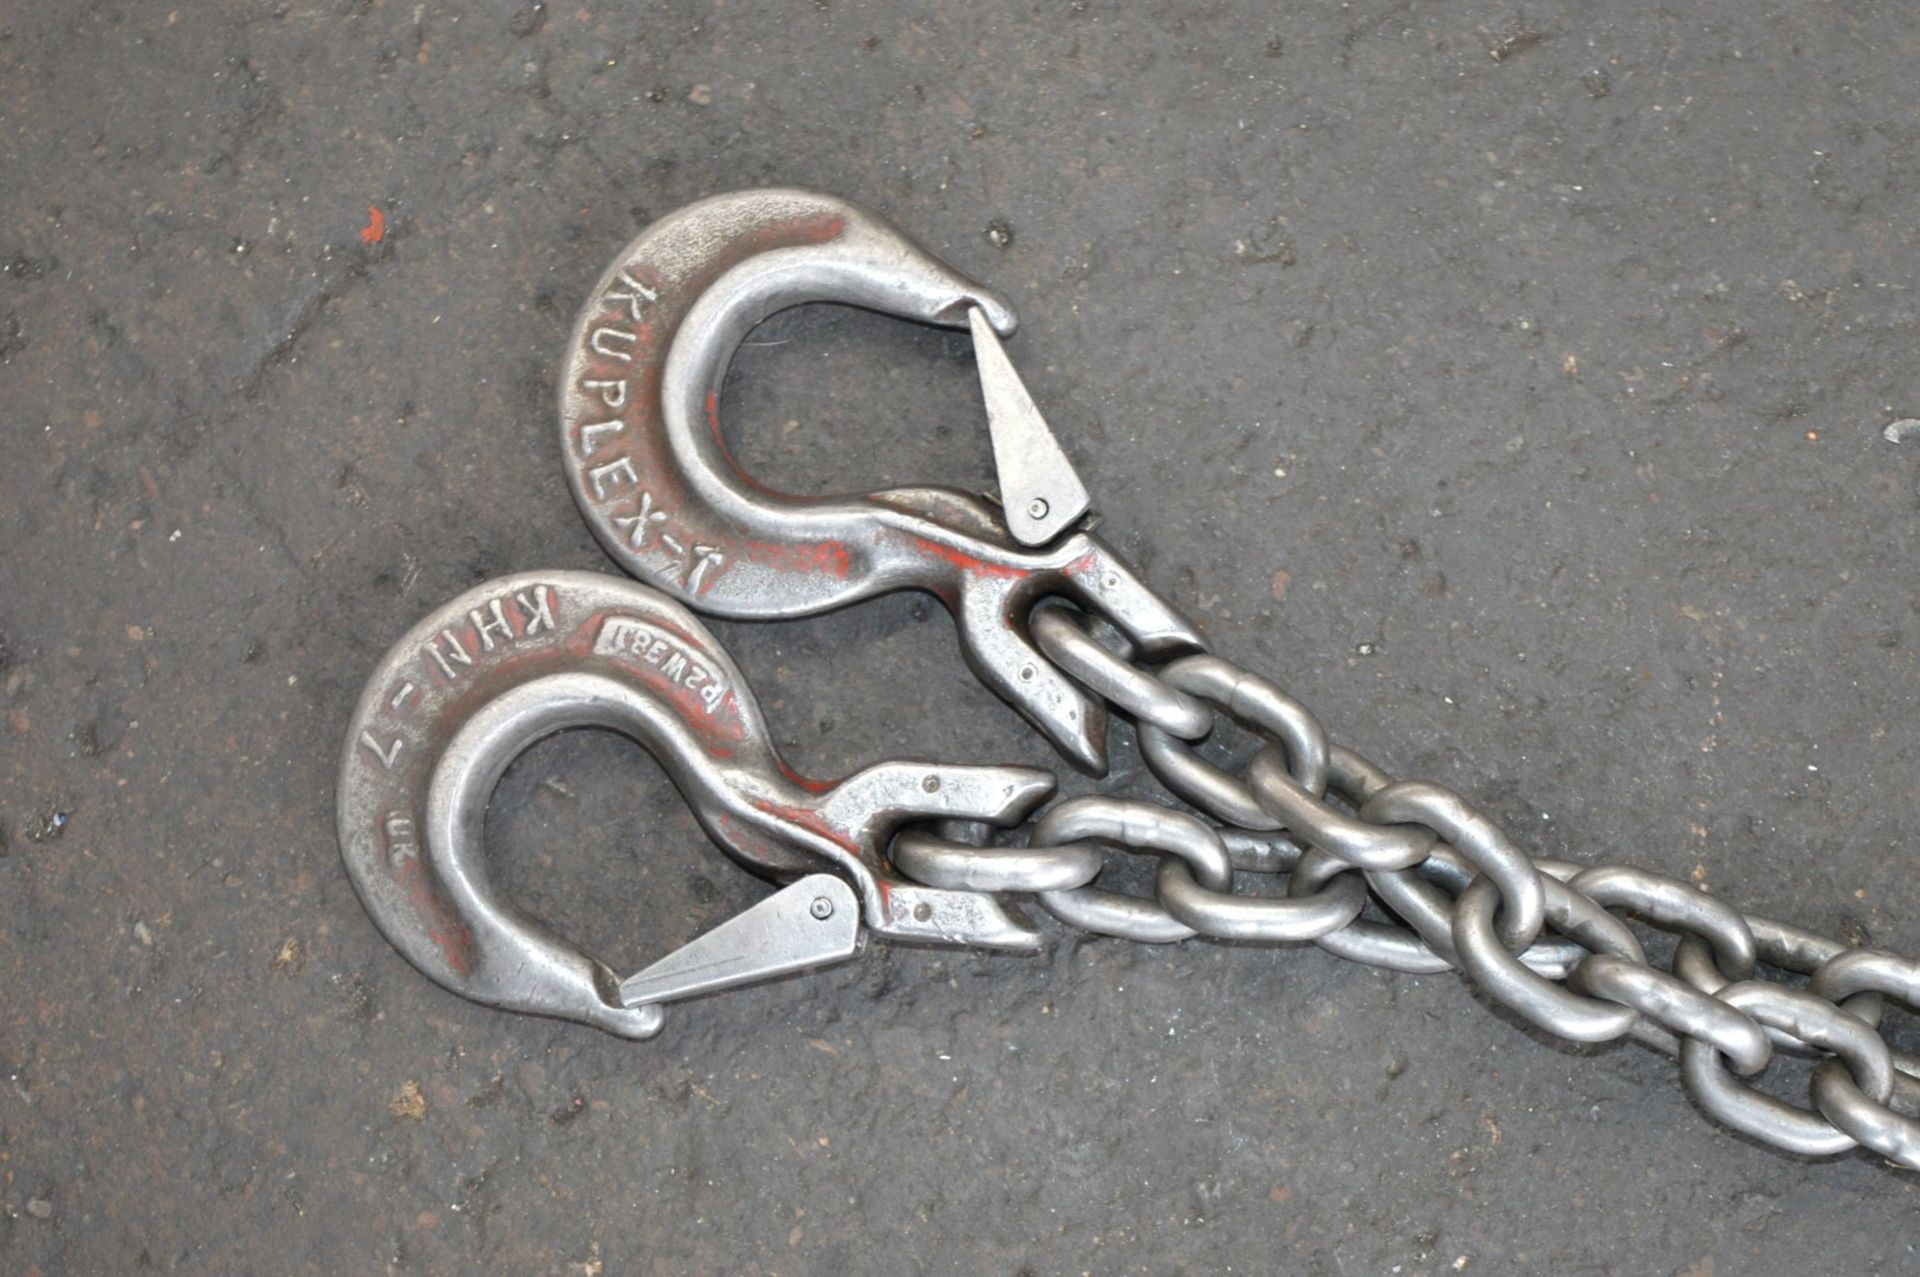 1 x Kuplex Lifting Chain With Various Sling Eye Hooks - Heavy Duty Lifting Equipment - CL202 - Ref - Image 3 of 7